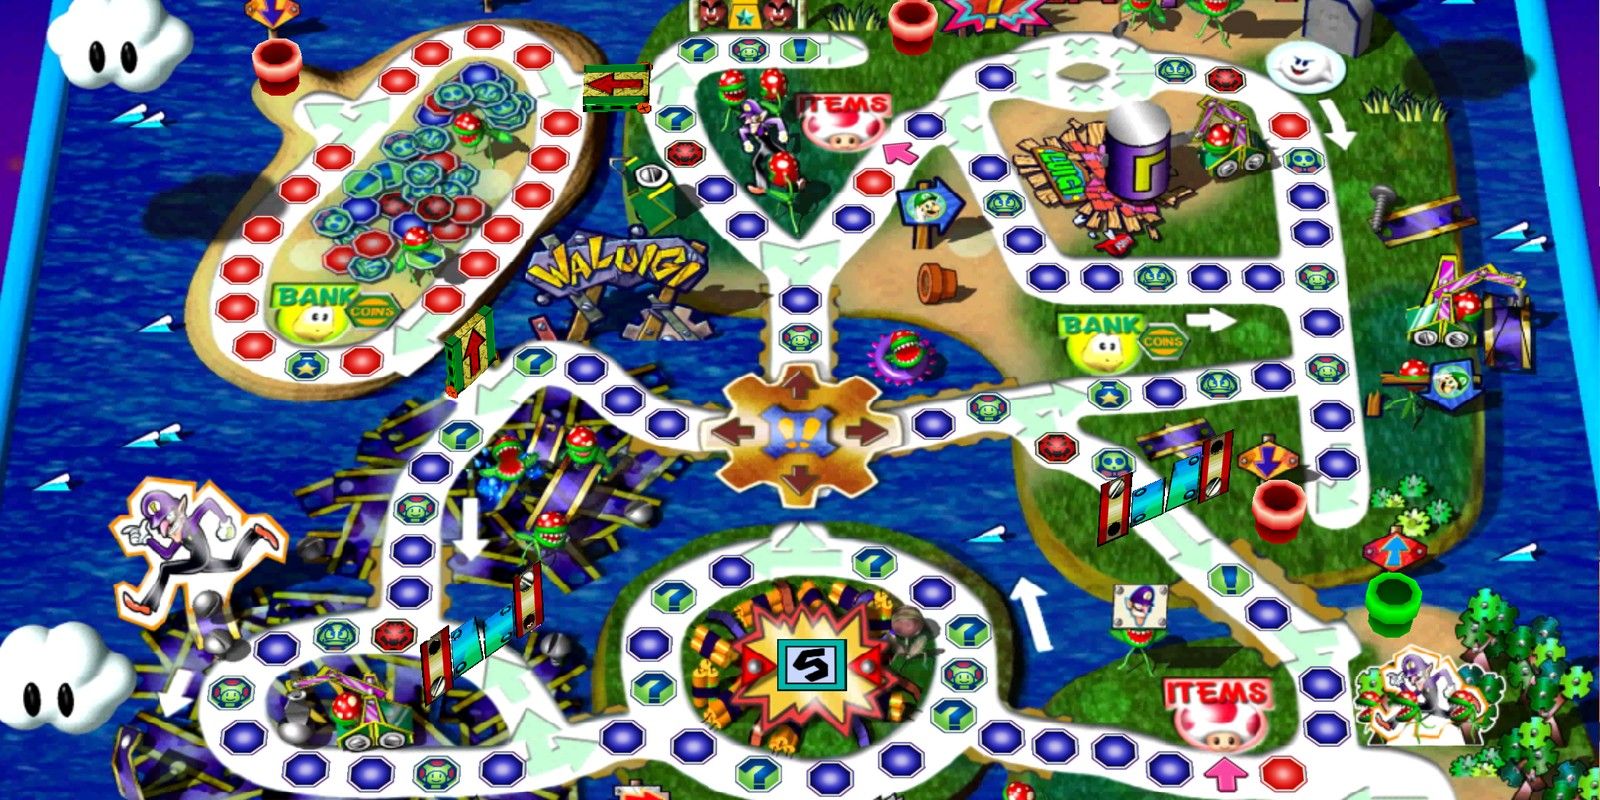 An overview of Waluigi's Island from Mario Party 3